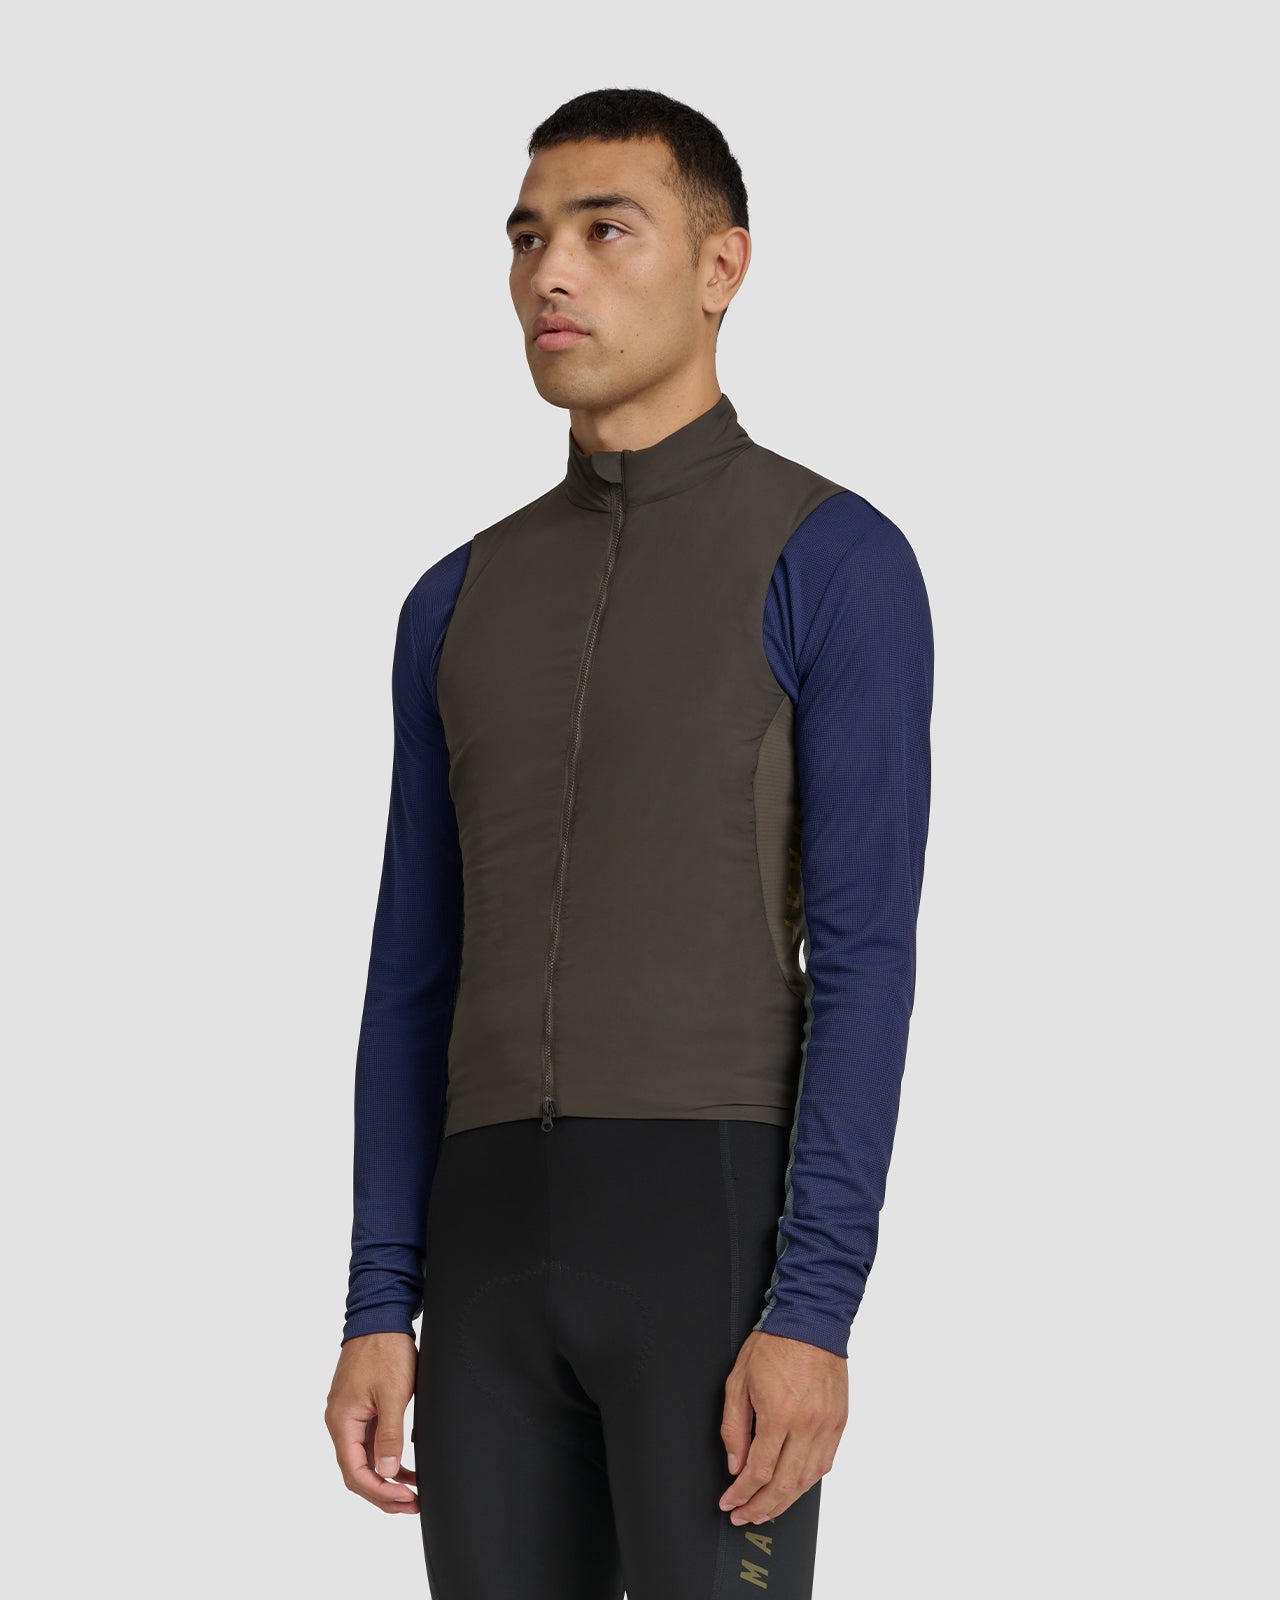 Alt_Road Thermal Vest - MAAP Cycling Apparel